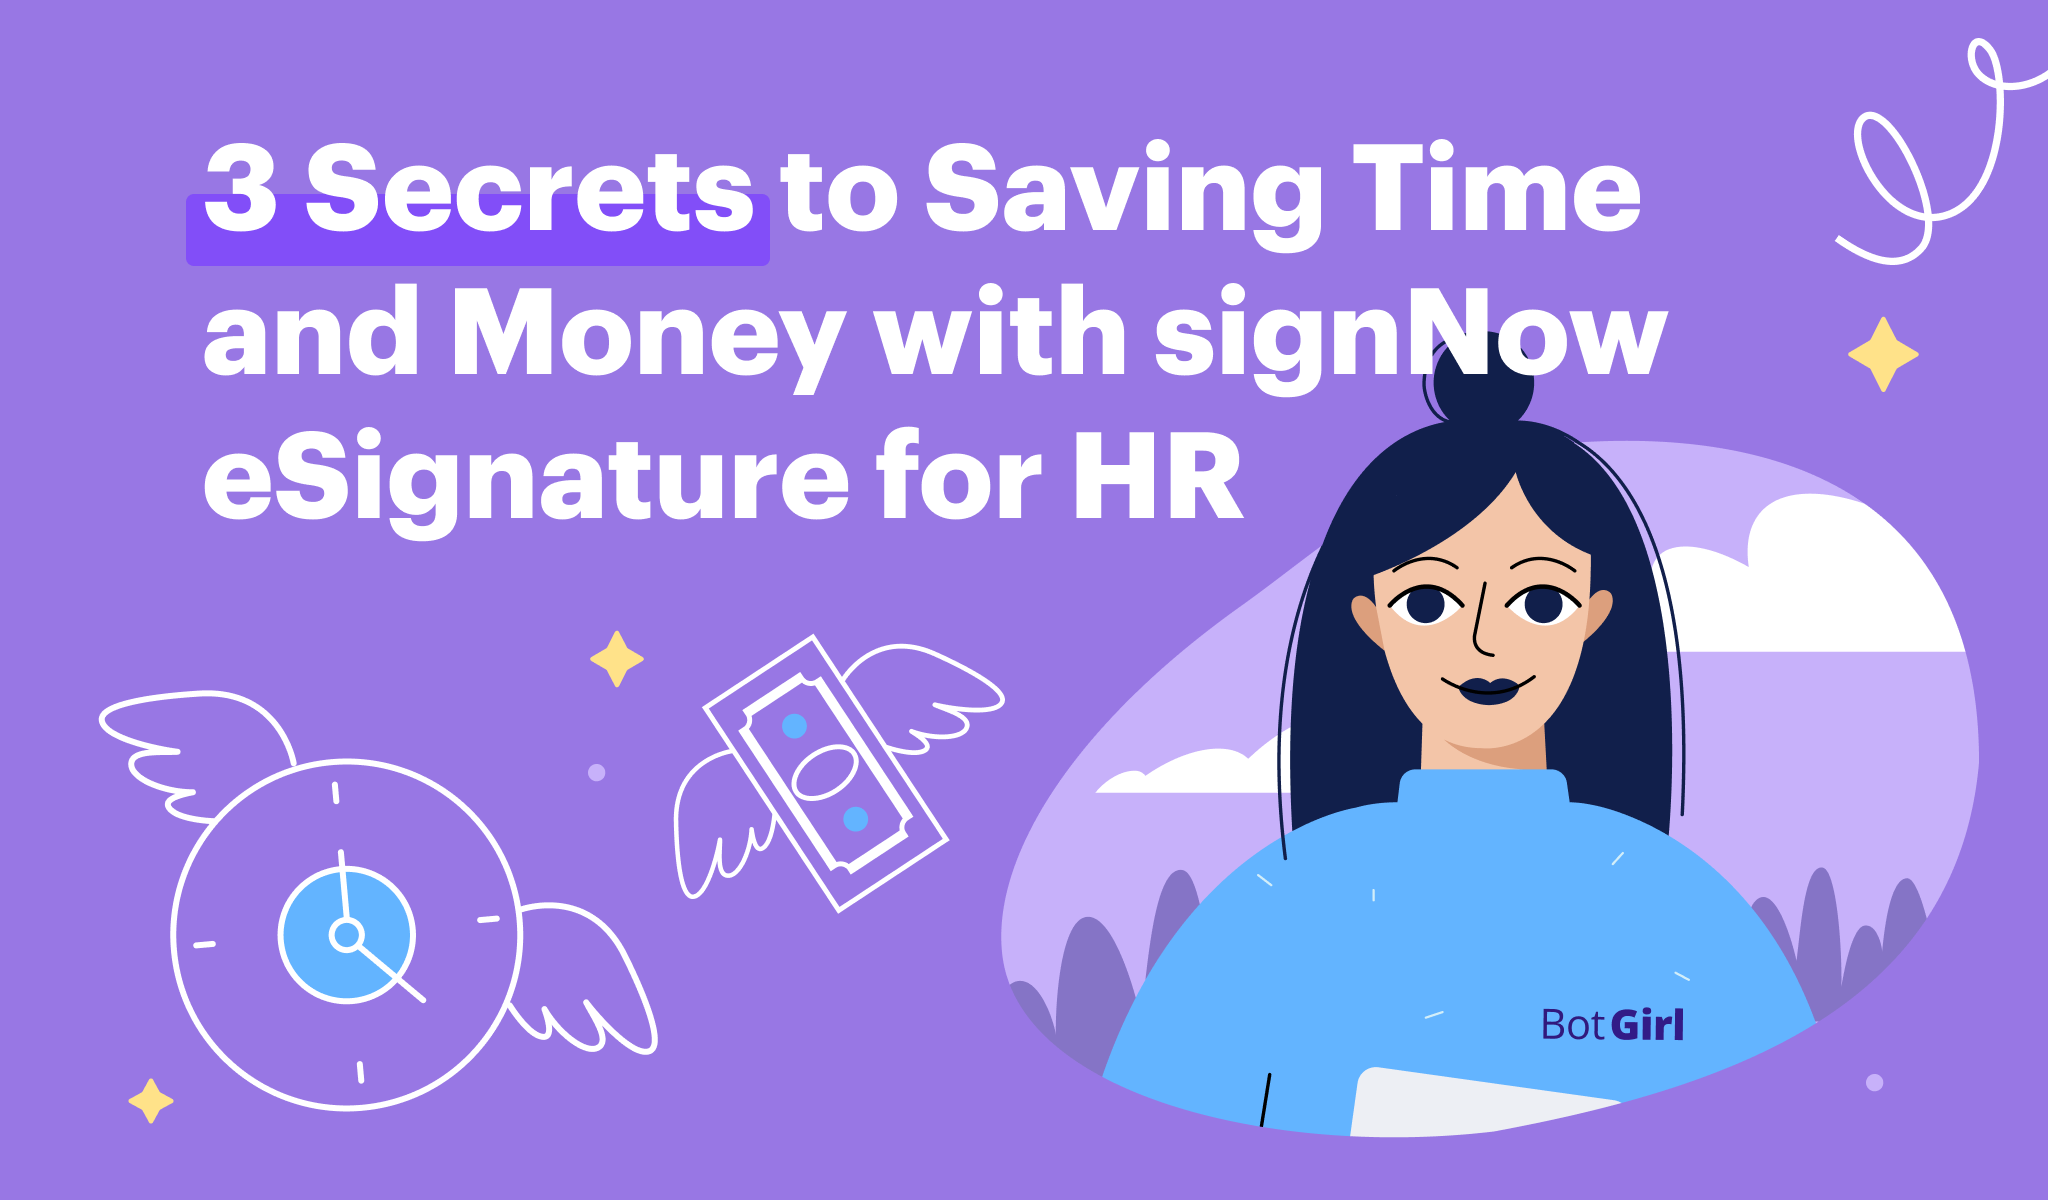 Here's how HR teams can save time & money with signNow's eSignature